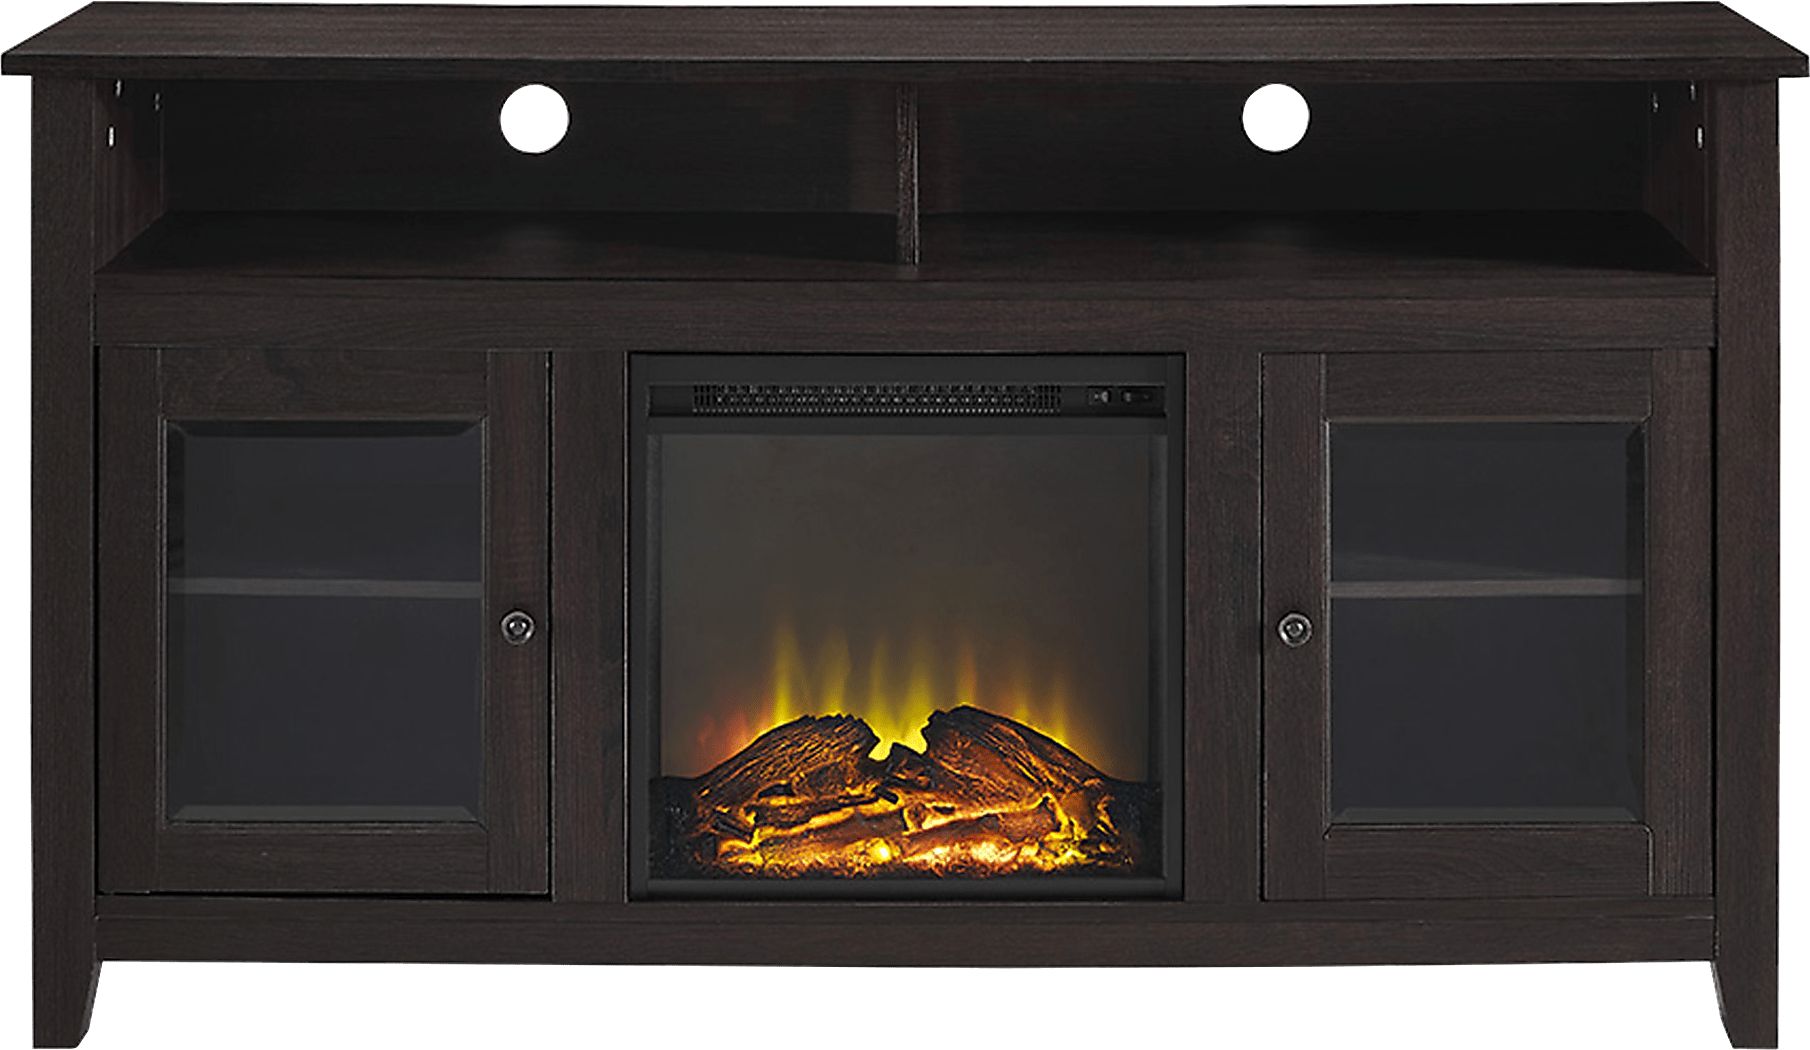 Winfield Trace Espresso 58 in. Console with Electric Fireplace